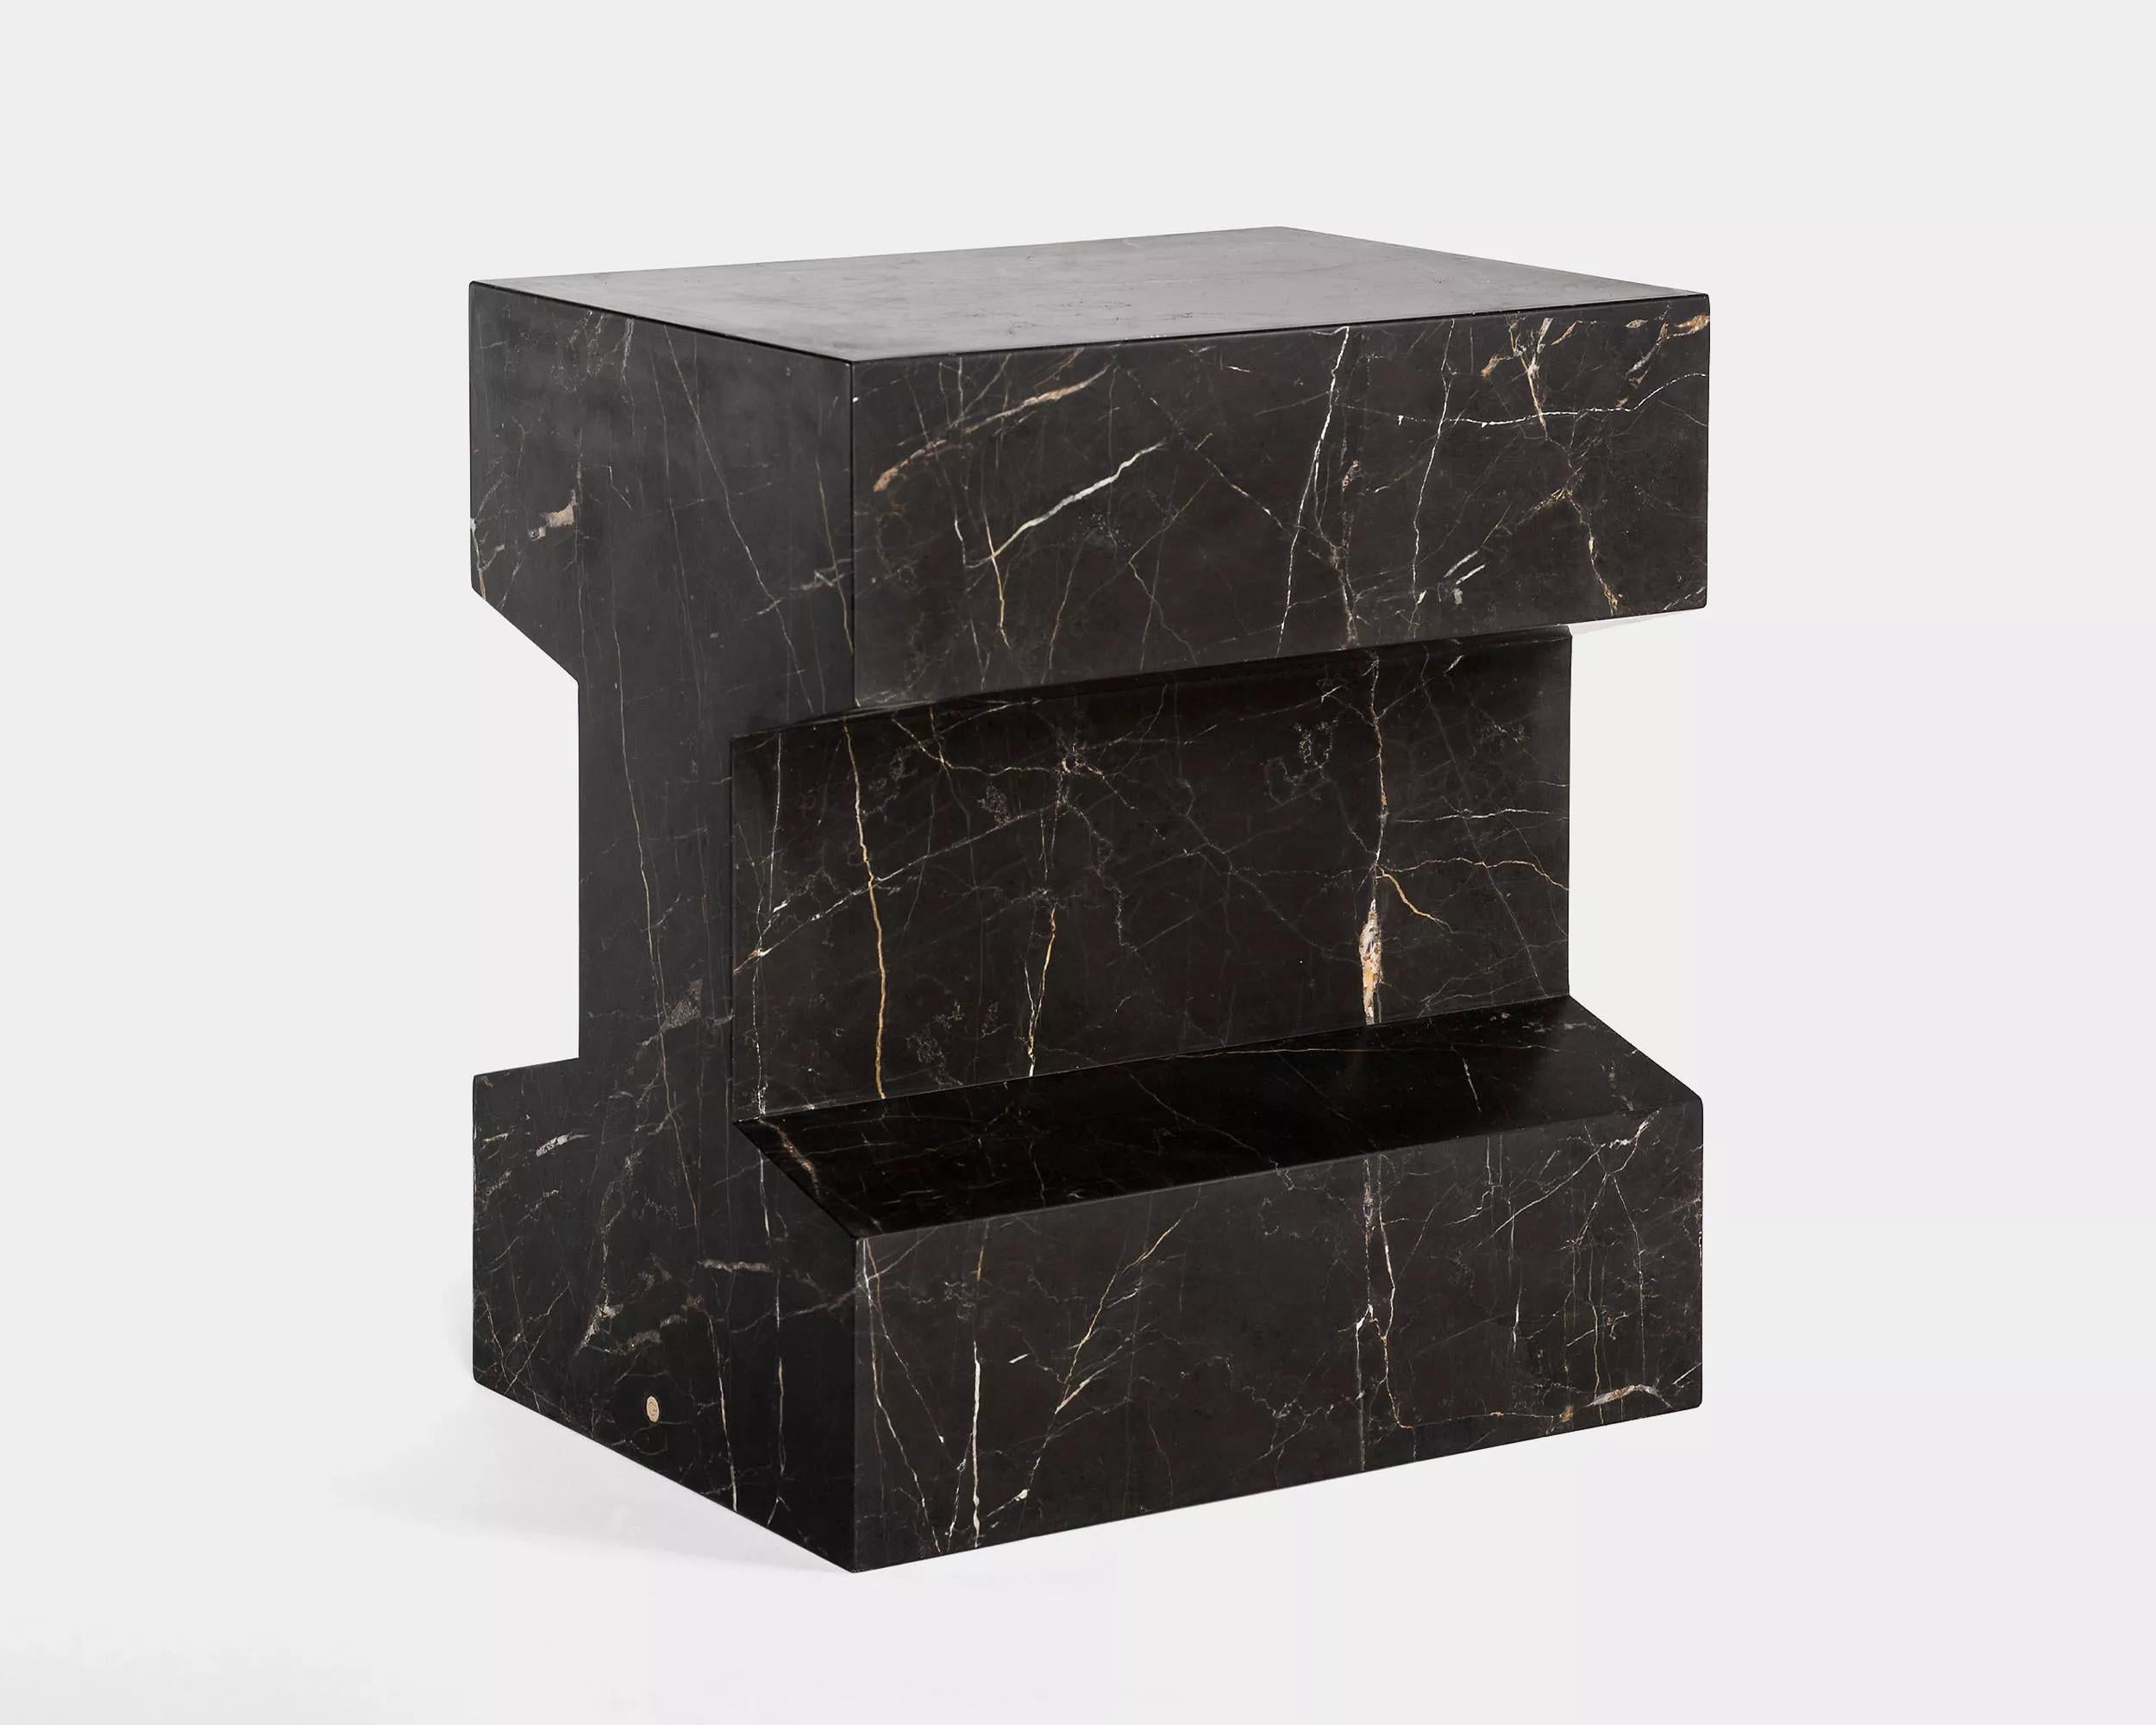 Modular piece, Rails 450 Marble Saint Laurent by Gwendoline Porte

Dimensions: H 45 x 40 x 30 cm
Material: Marble
Color : black marble Saint Laurent
---
The Rails collection designed by Gwendoline Porte is a series of modular pieces inspired